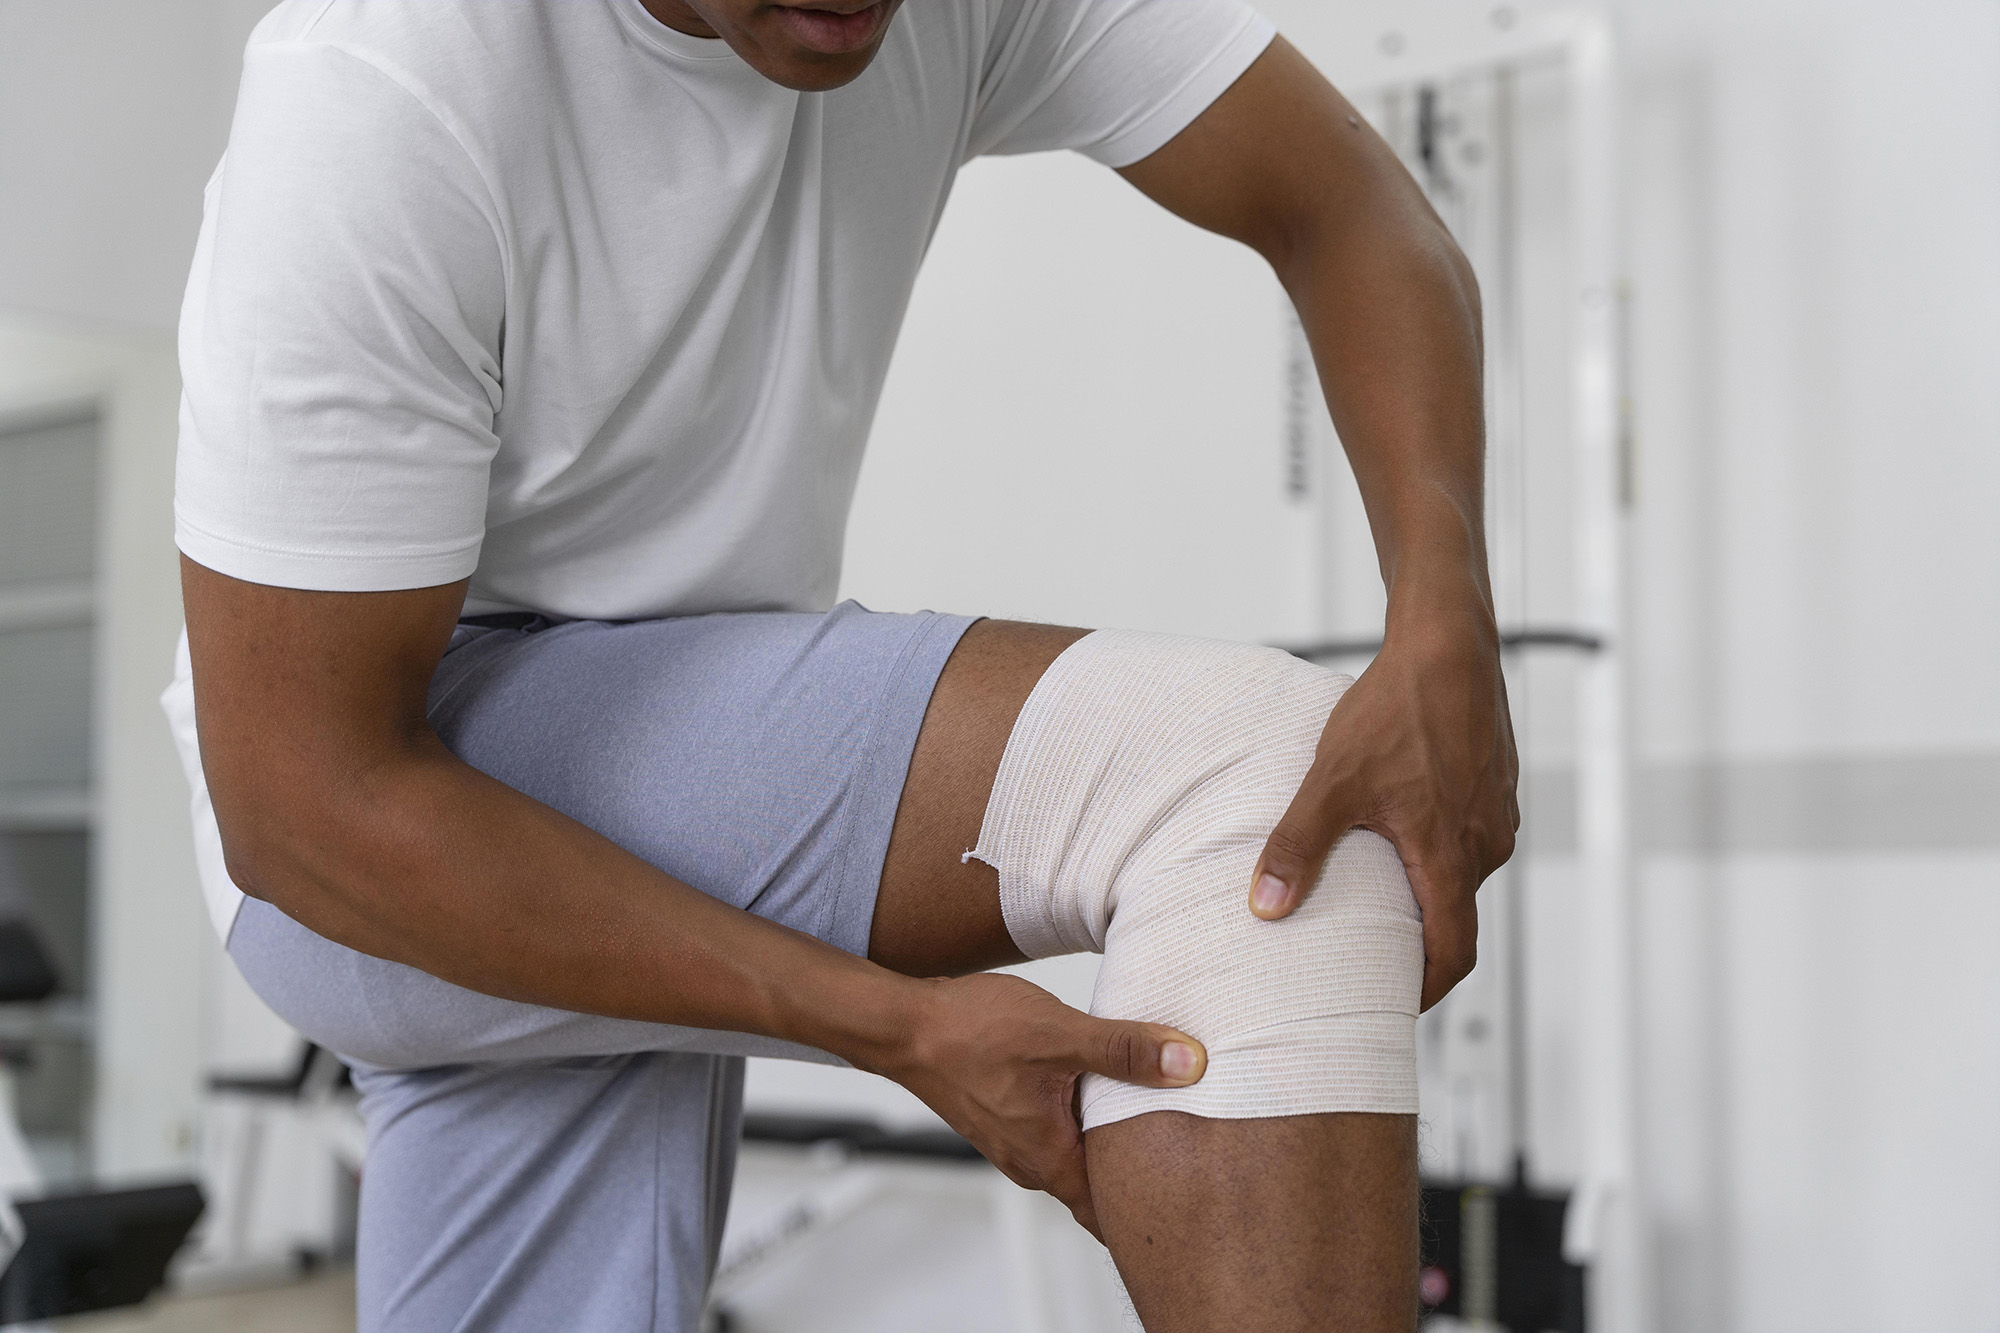 Arthroscopic Knee Reconstruction Vs. Knee Replacement: What’s the Difference?